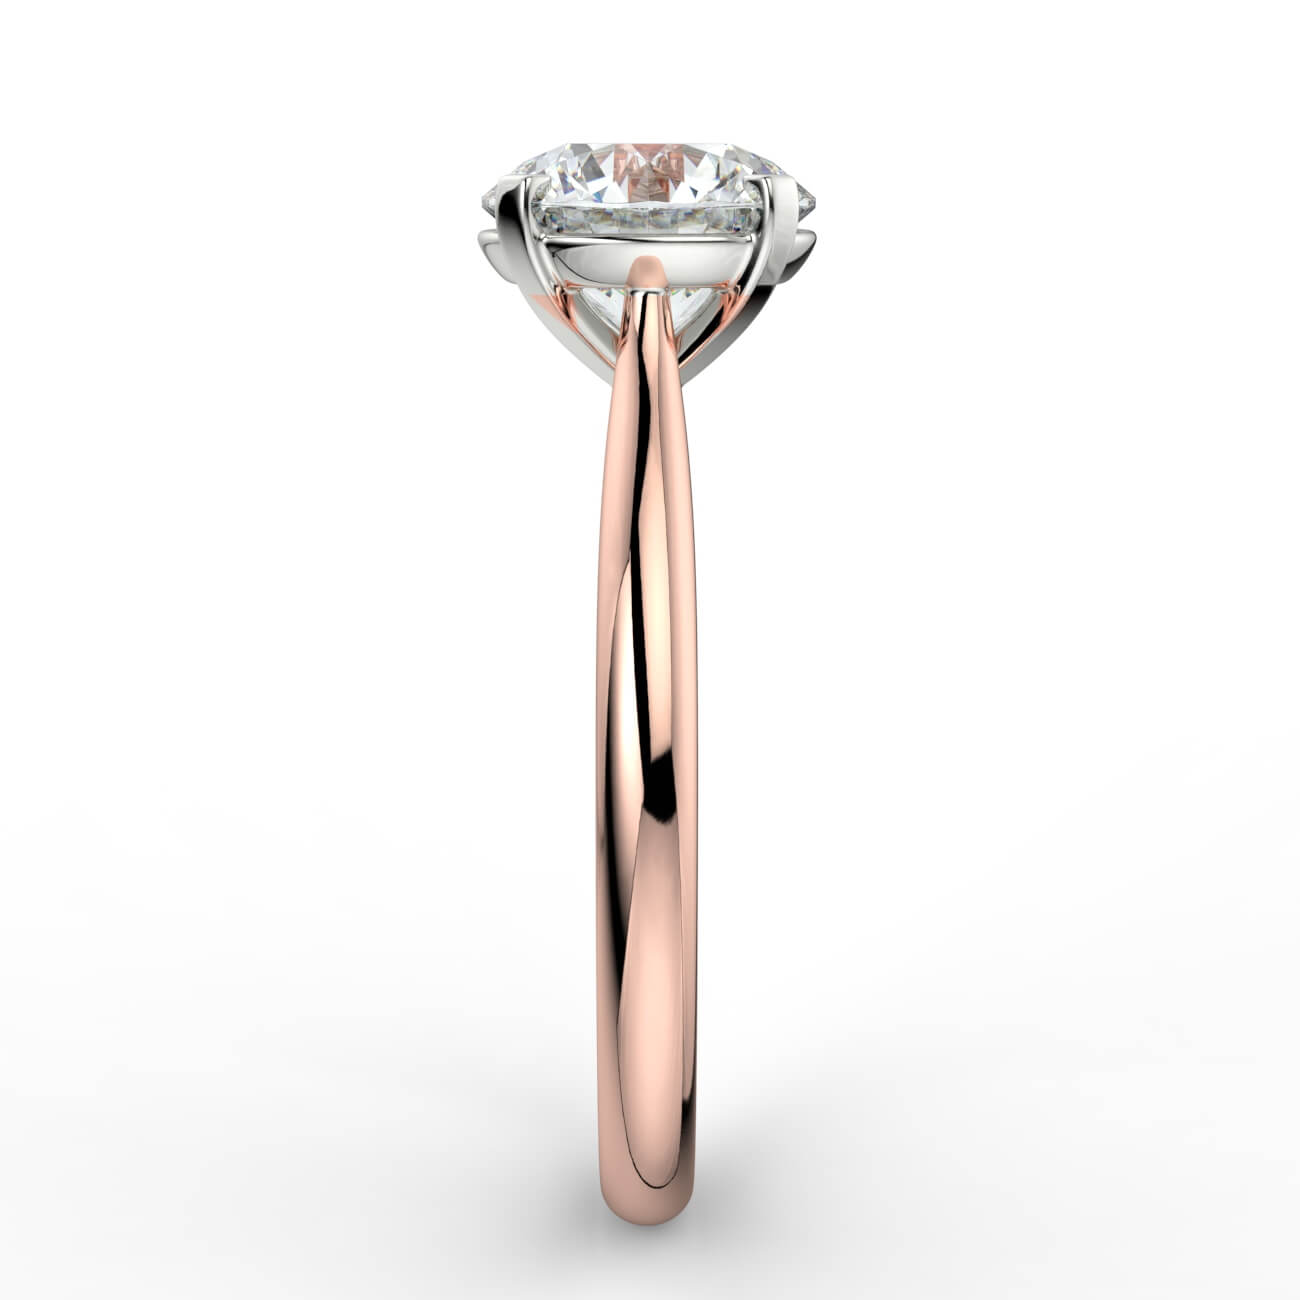 Round brilliant cut diamond cathedral engagement ring in rose and white gold – Australian Diamond Network